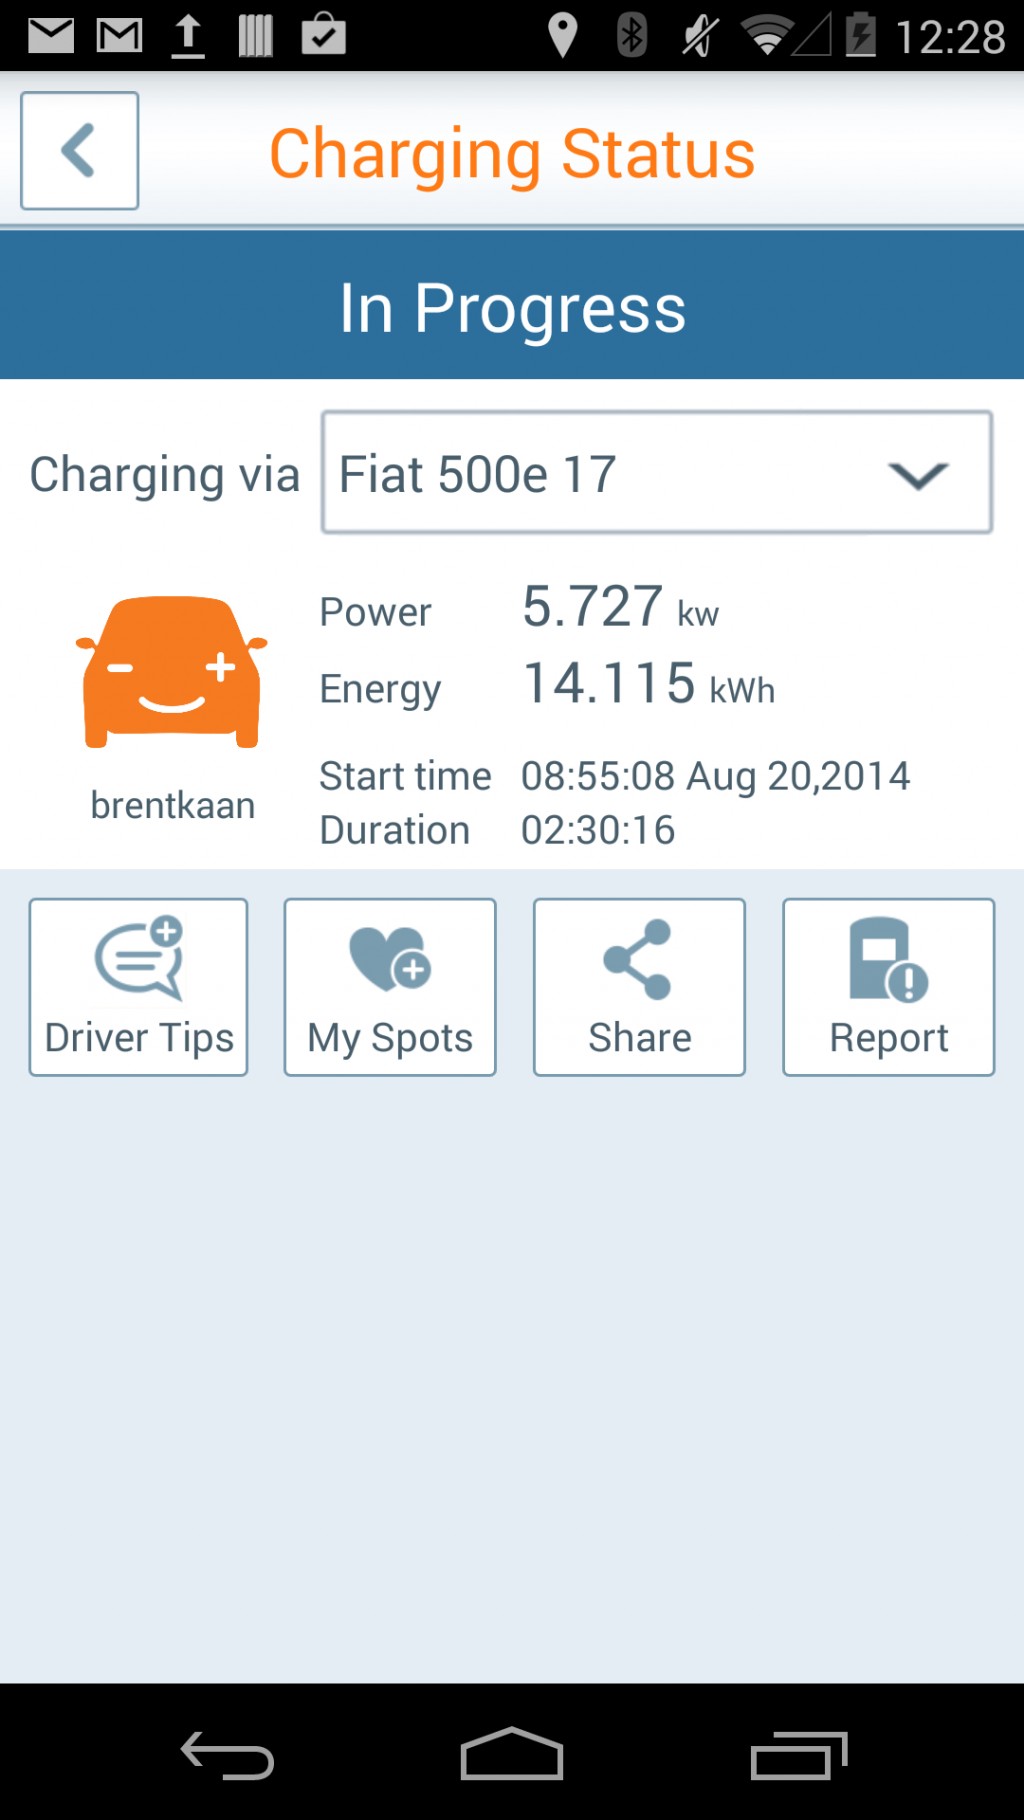 chargepoint-smartphone-app-for-locating-electric-car-charging-stations-aug-2014_100477596_l.jpg